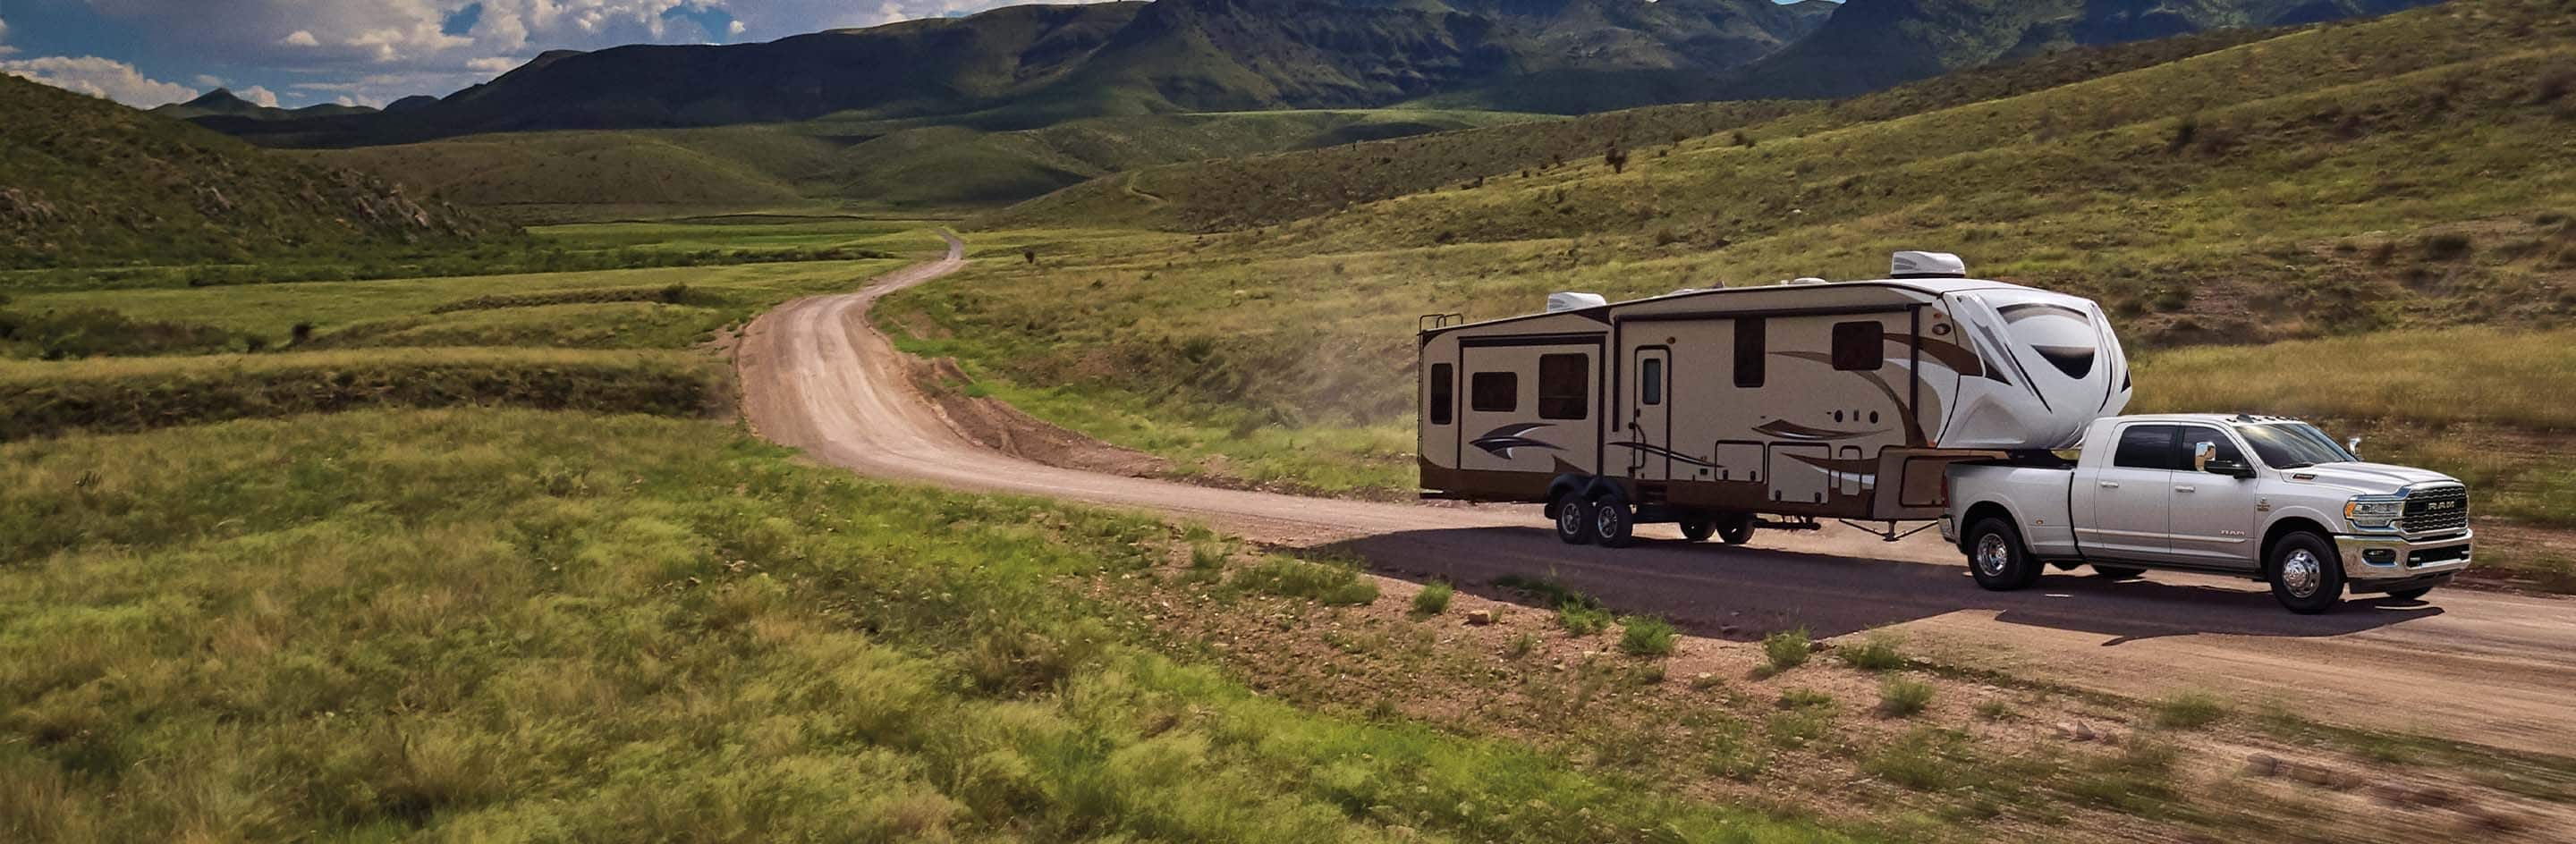 Tips for Towing a Camper in Colorado